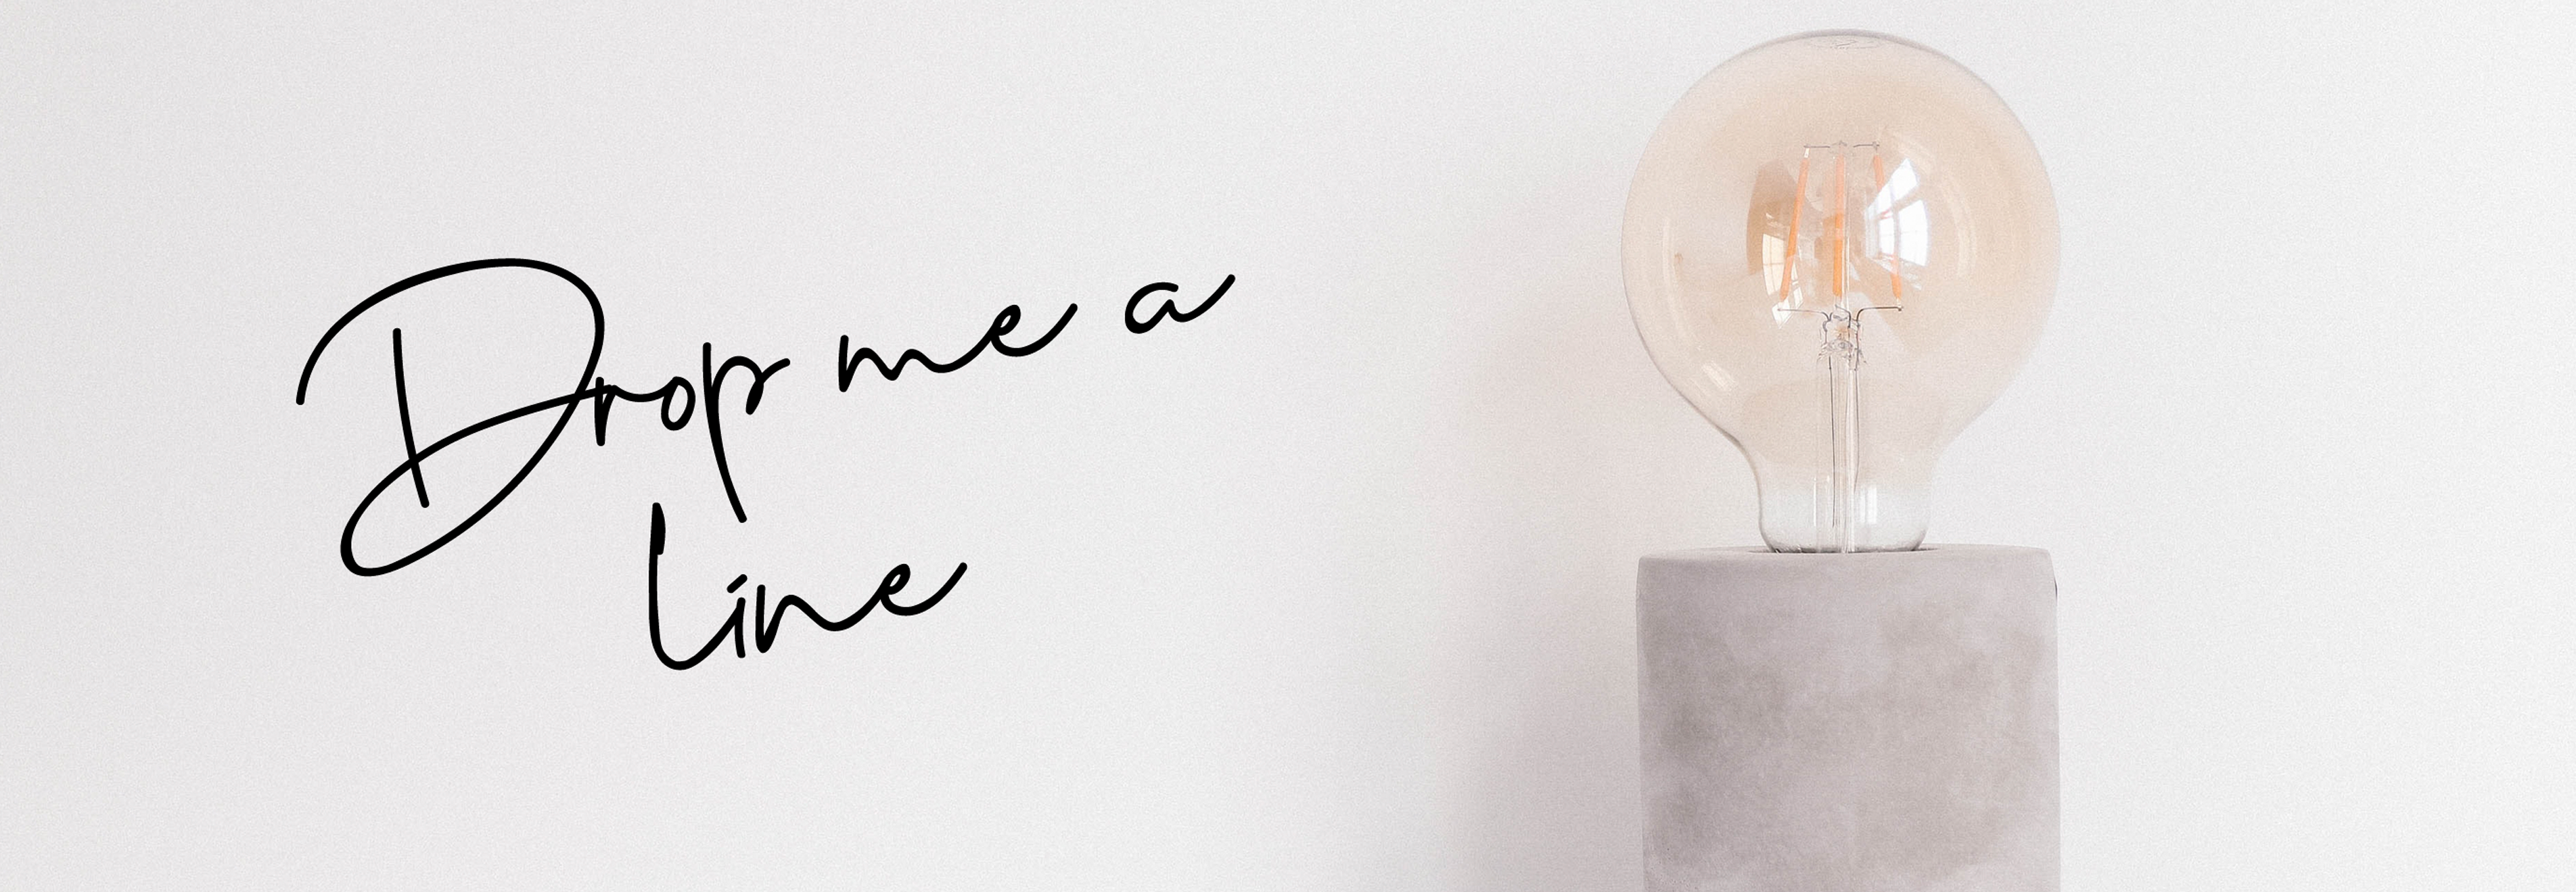 contact us to find out  more about working with a copywriter. Lightbulb on a white background.